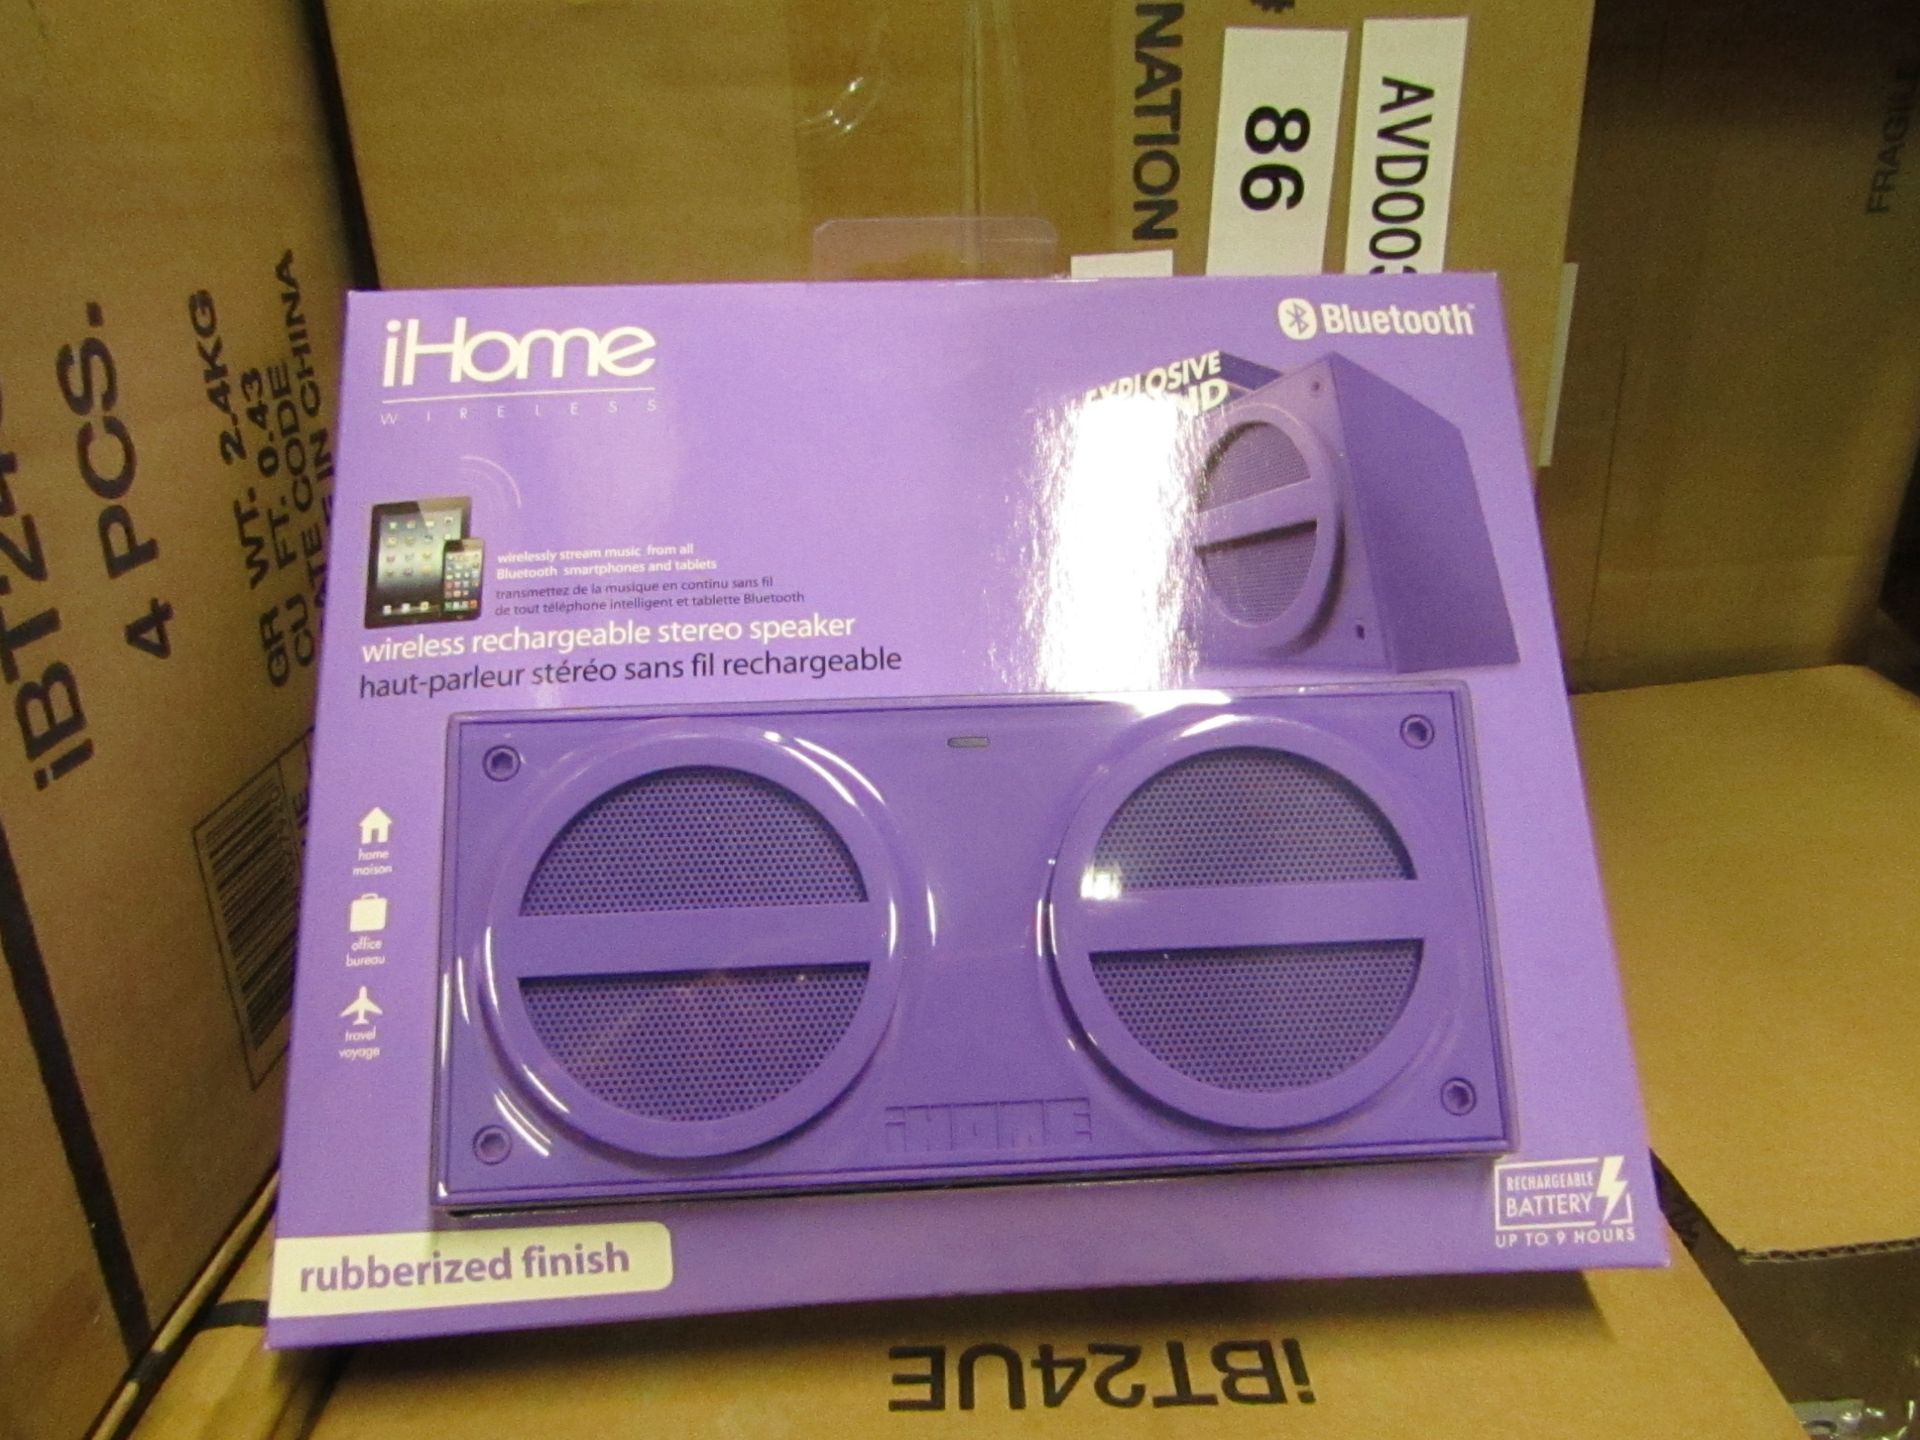 Ihome wireless rechargeable stereo speaker - New & Packaged